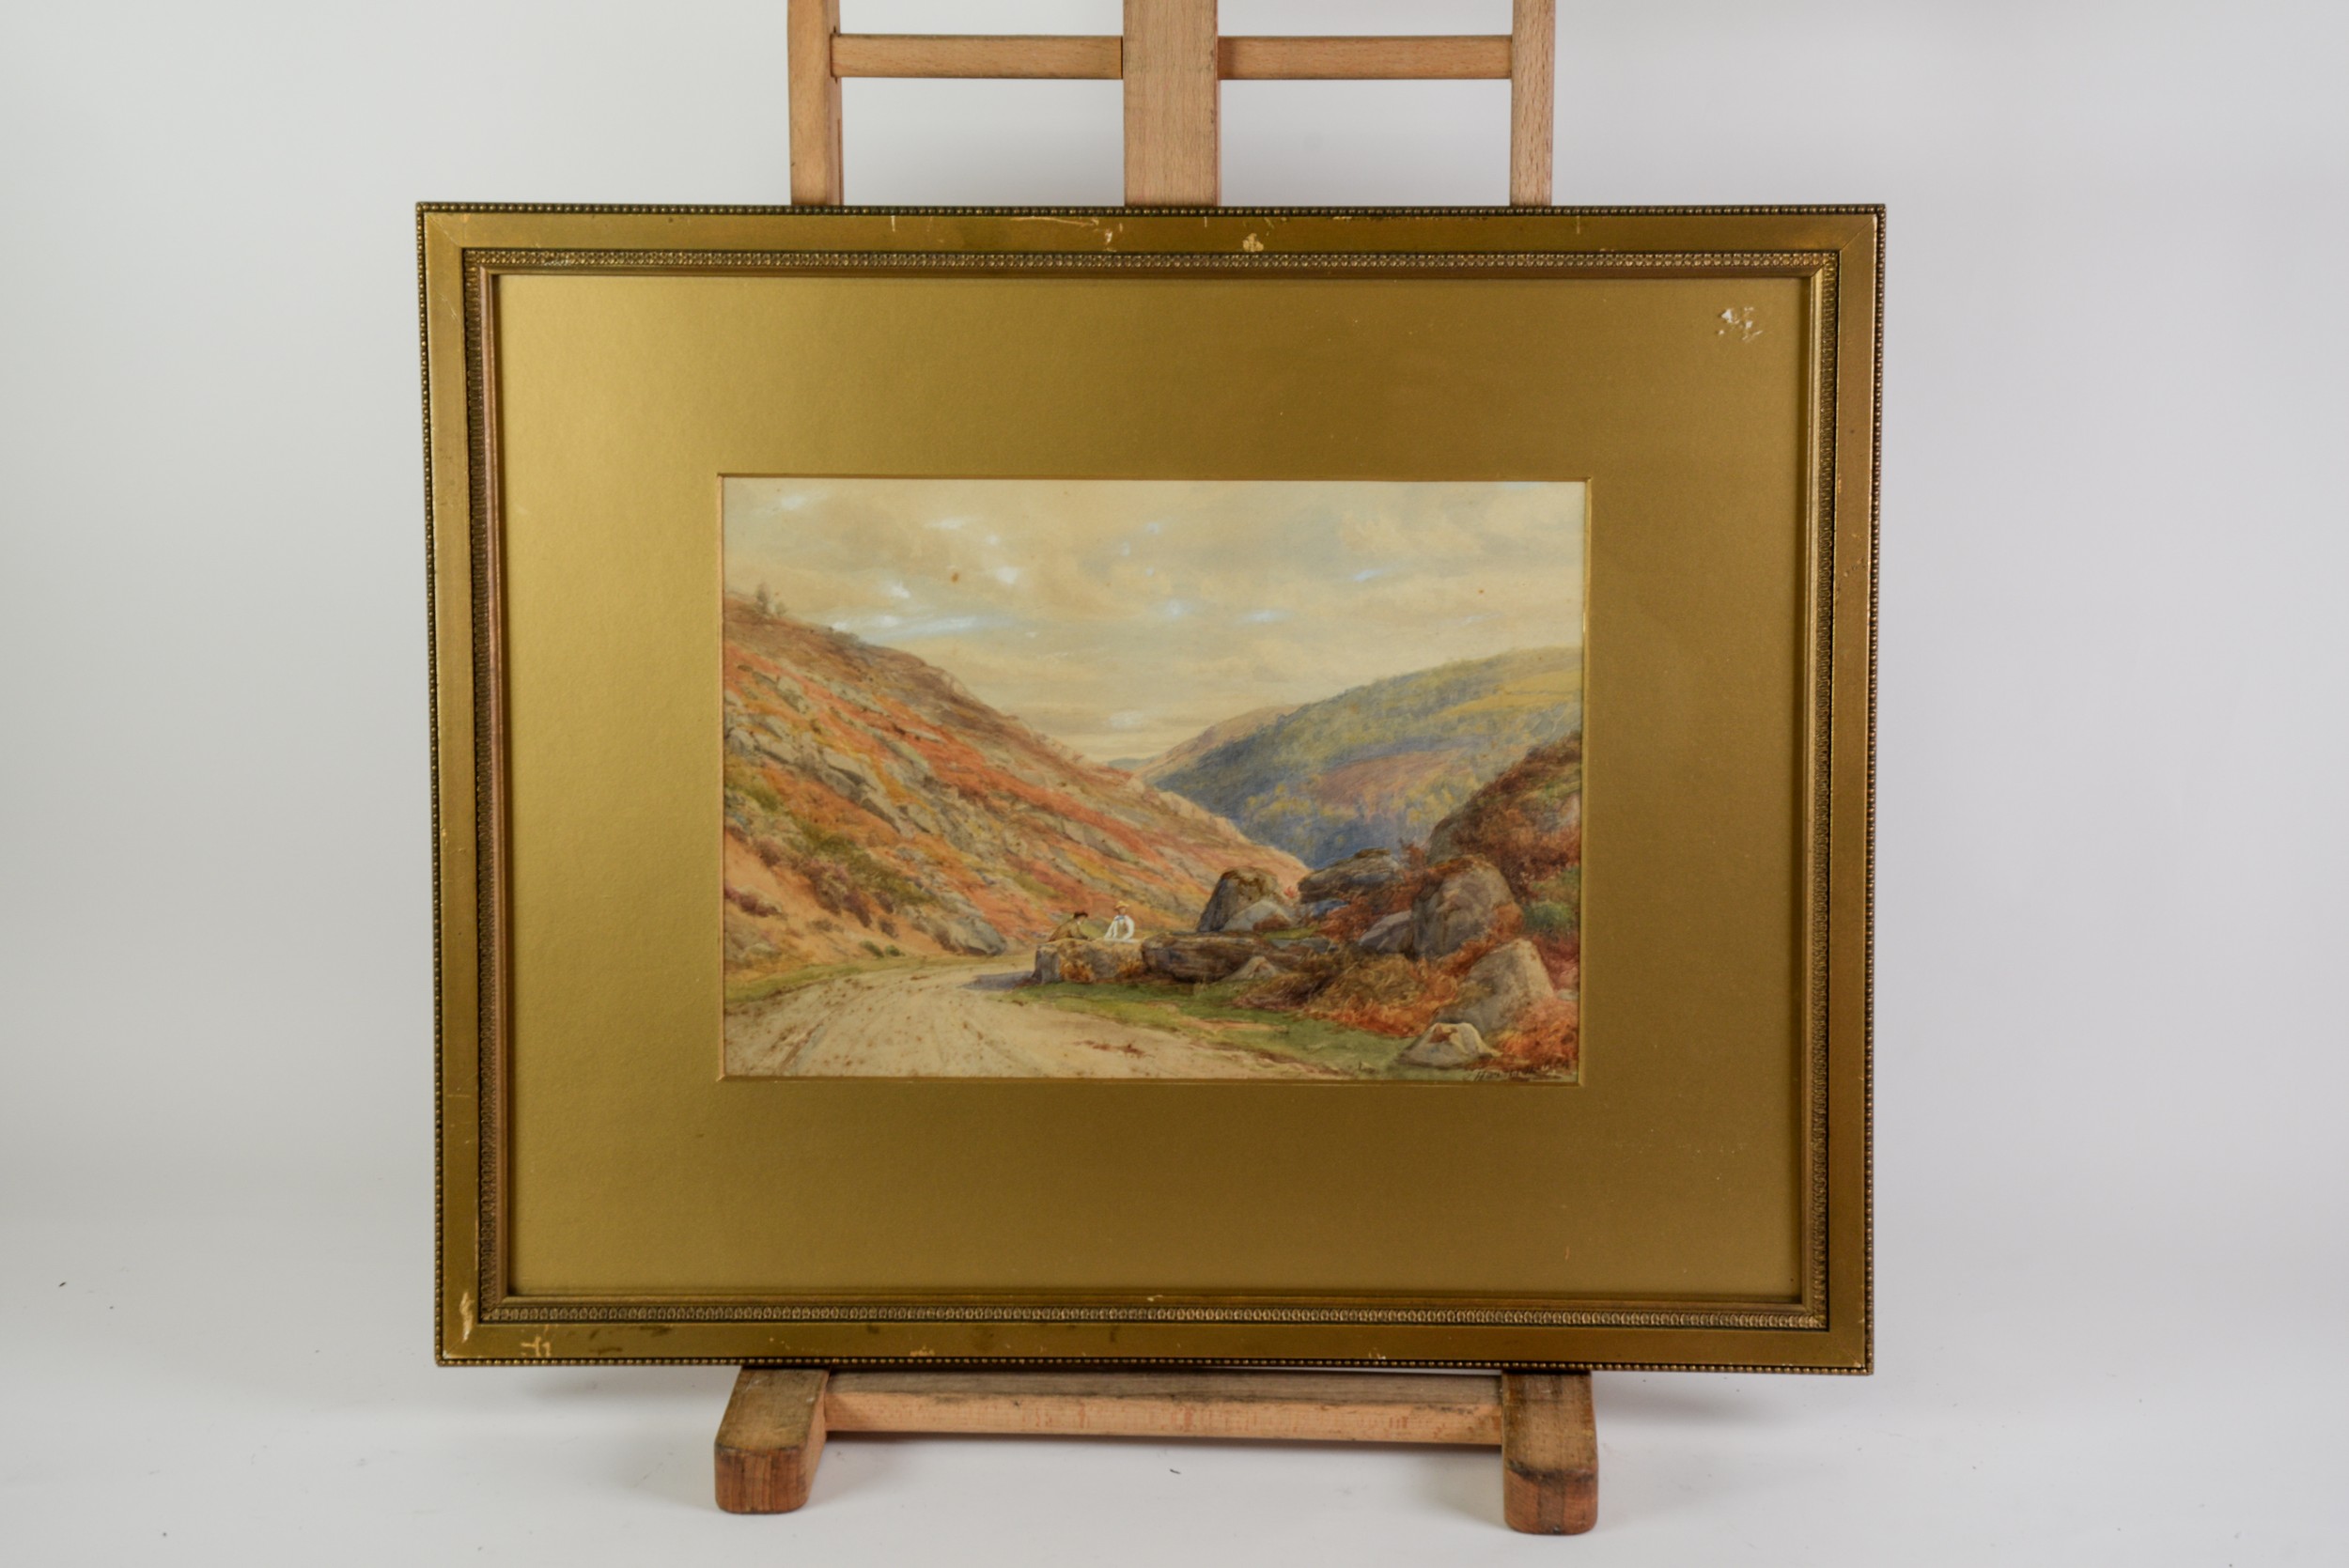 GEORGE HARRISON R C A (fl.1867-1880) WATERCOLOURS, A MATCHED PAIR Views in North Wales Both signed